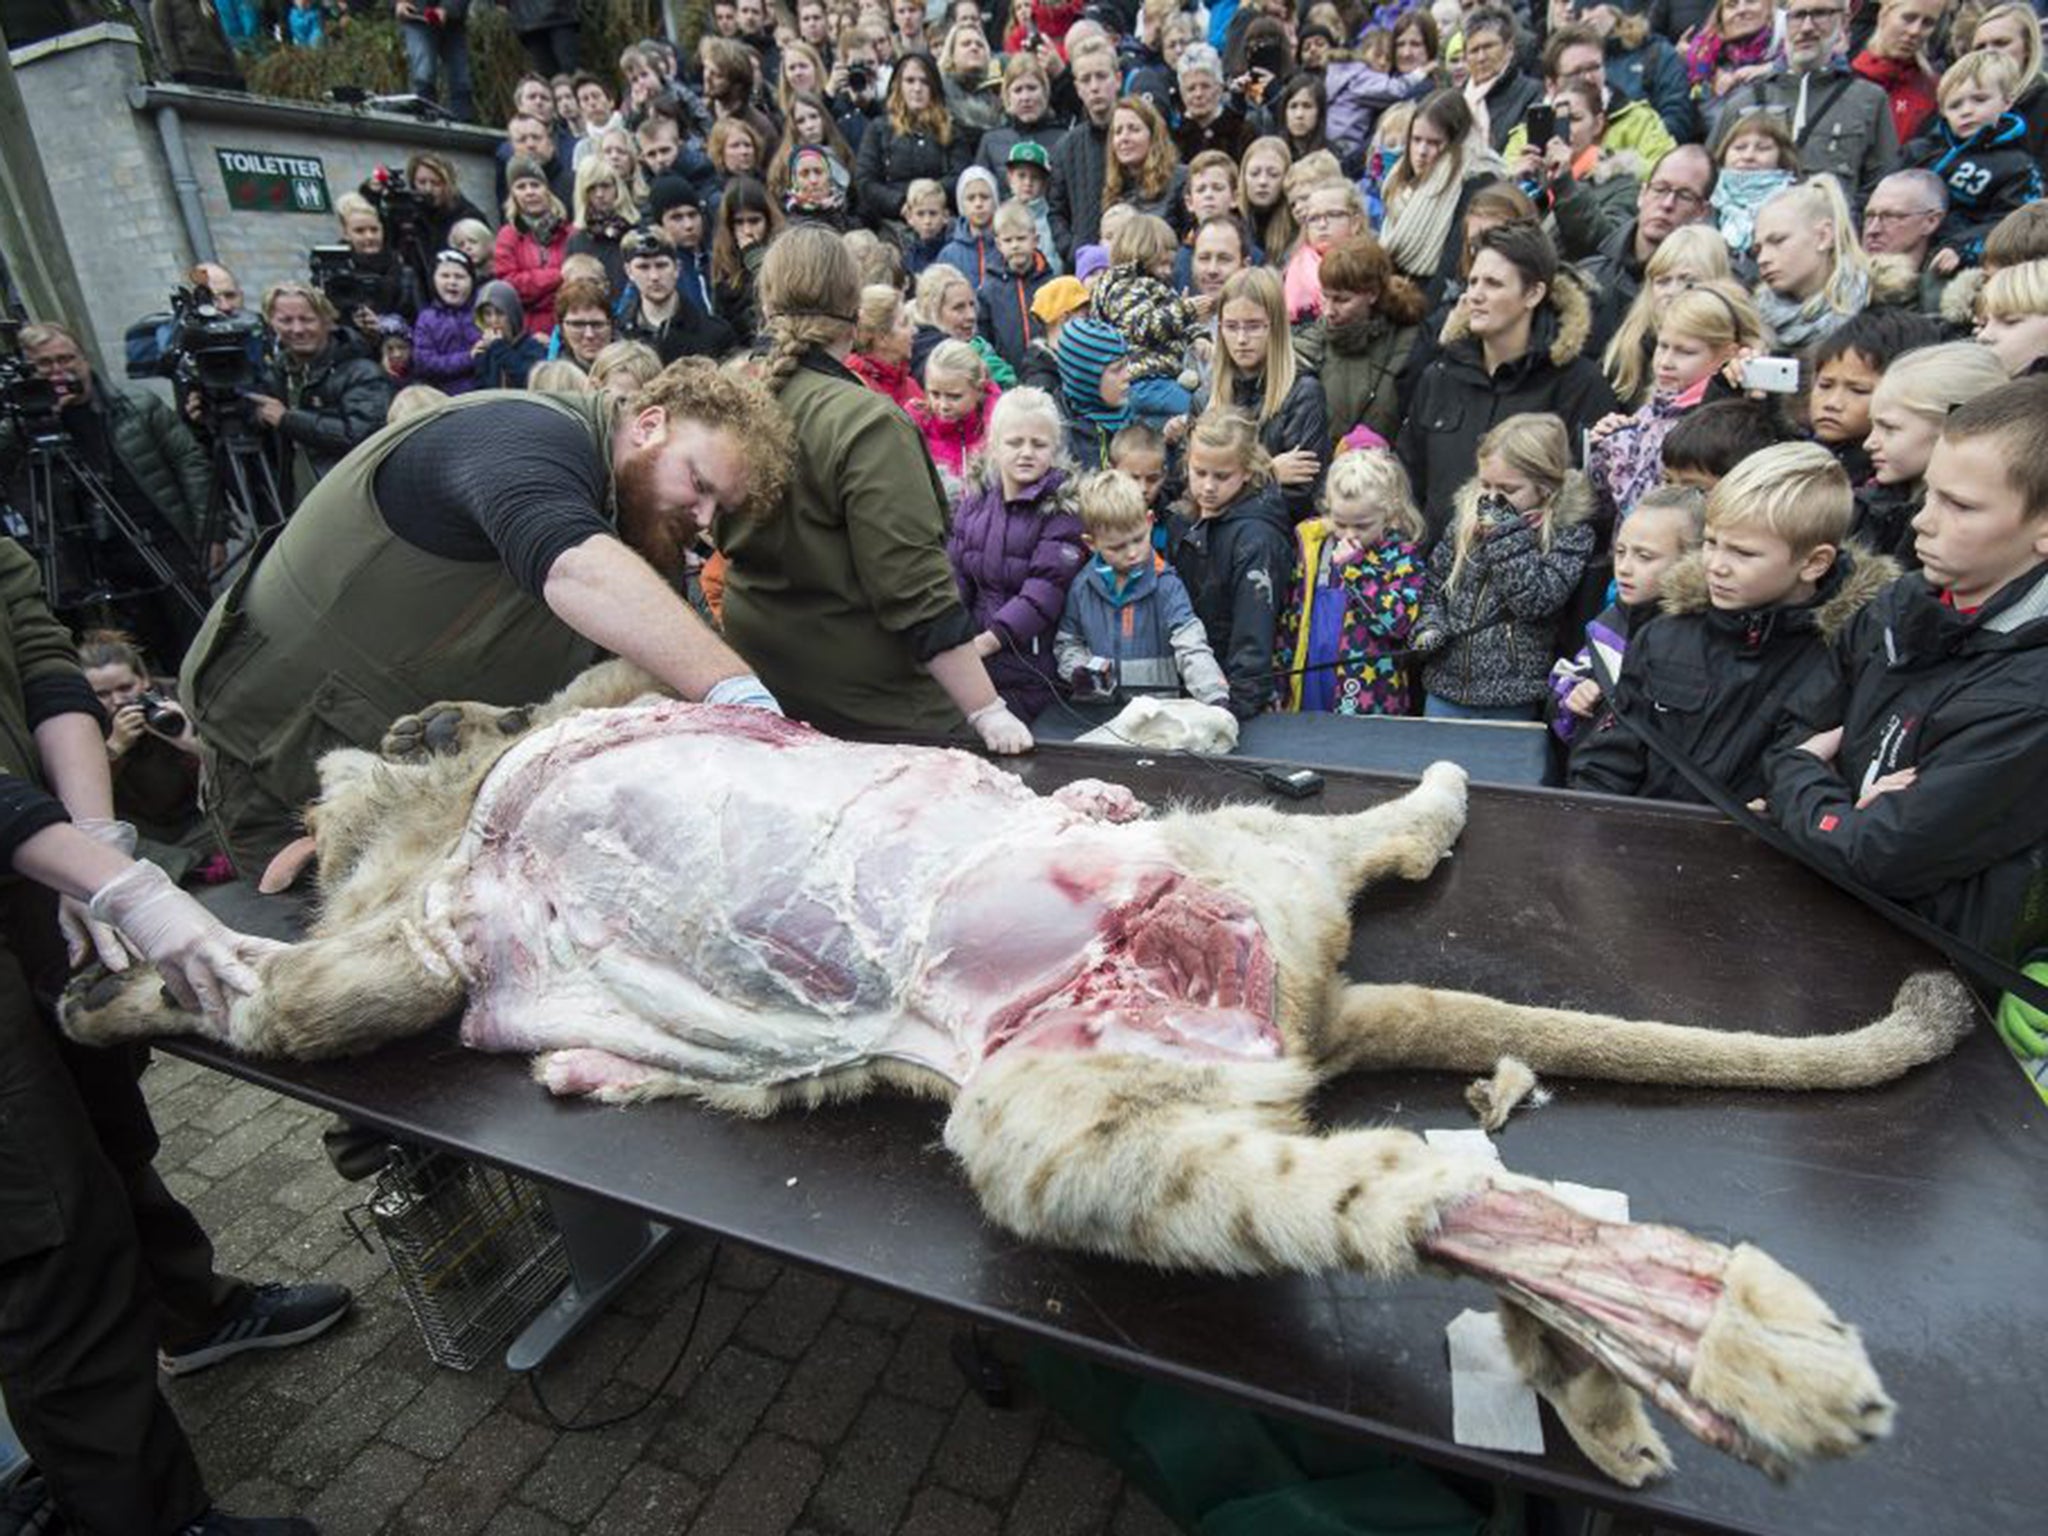 Staff at Odense Zoo dissected the lion in front of a live audience as well as streaming it online